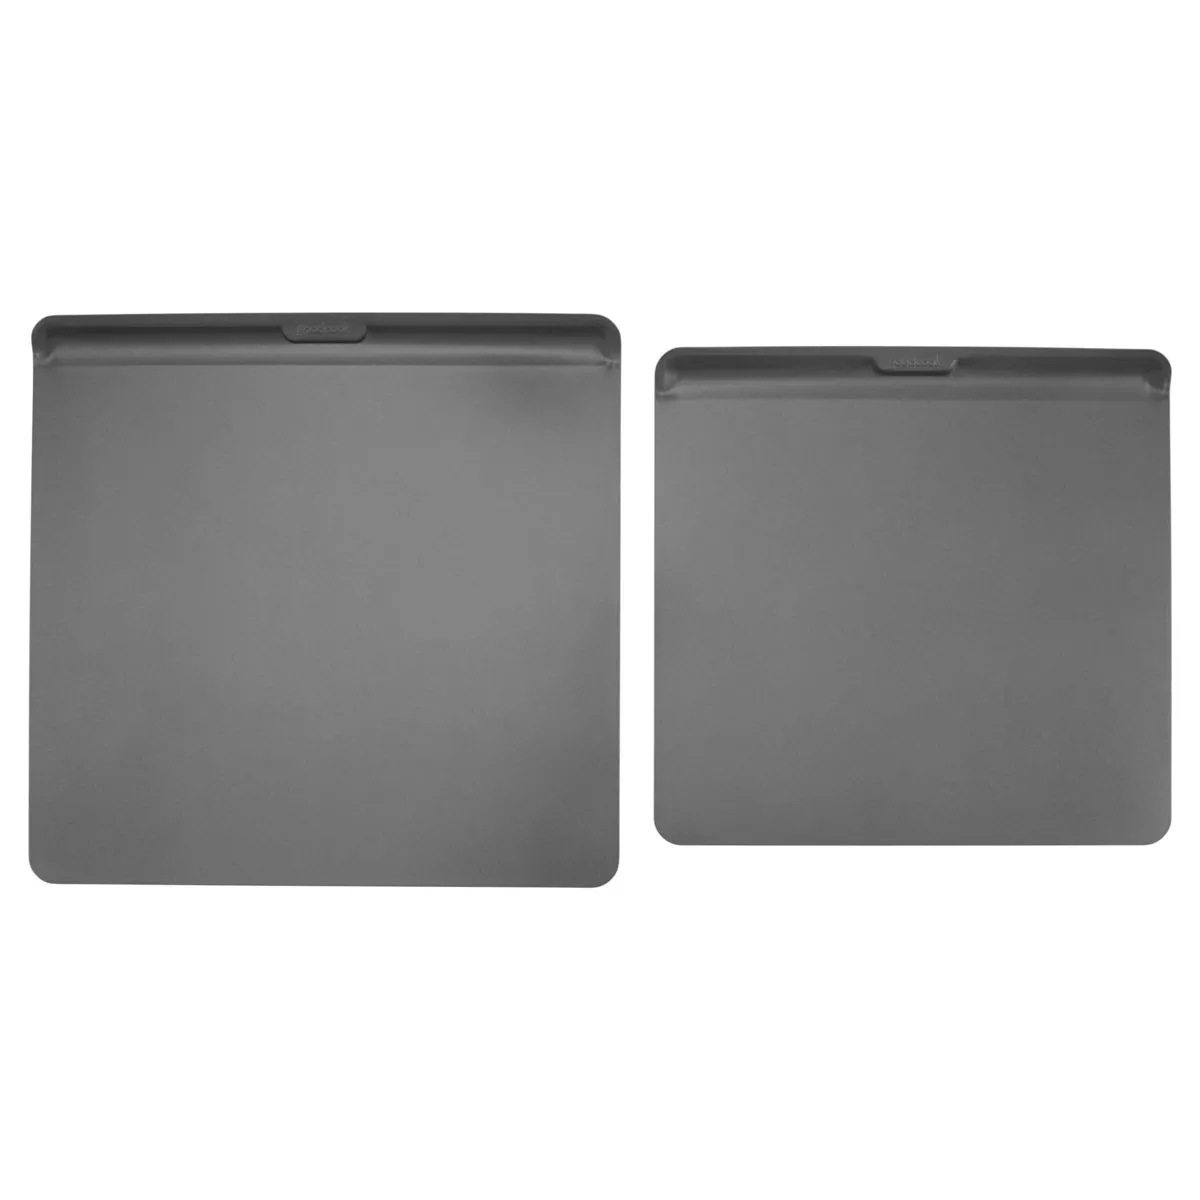 Goodcook Airperfect Set of 2 Insulated Nonstick Baking Cookie Sheets, Large